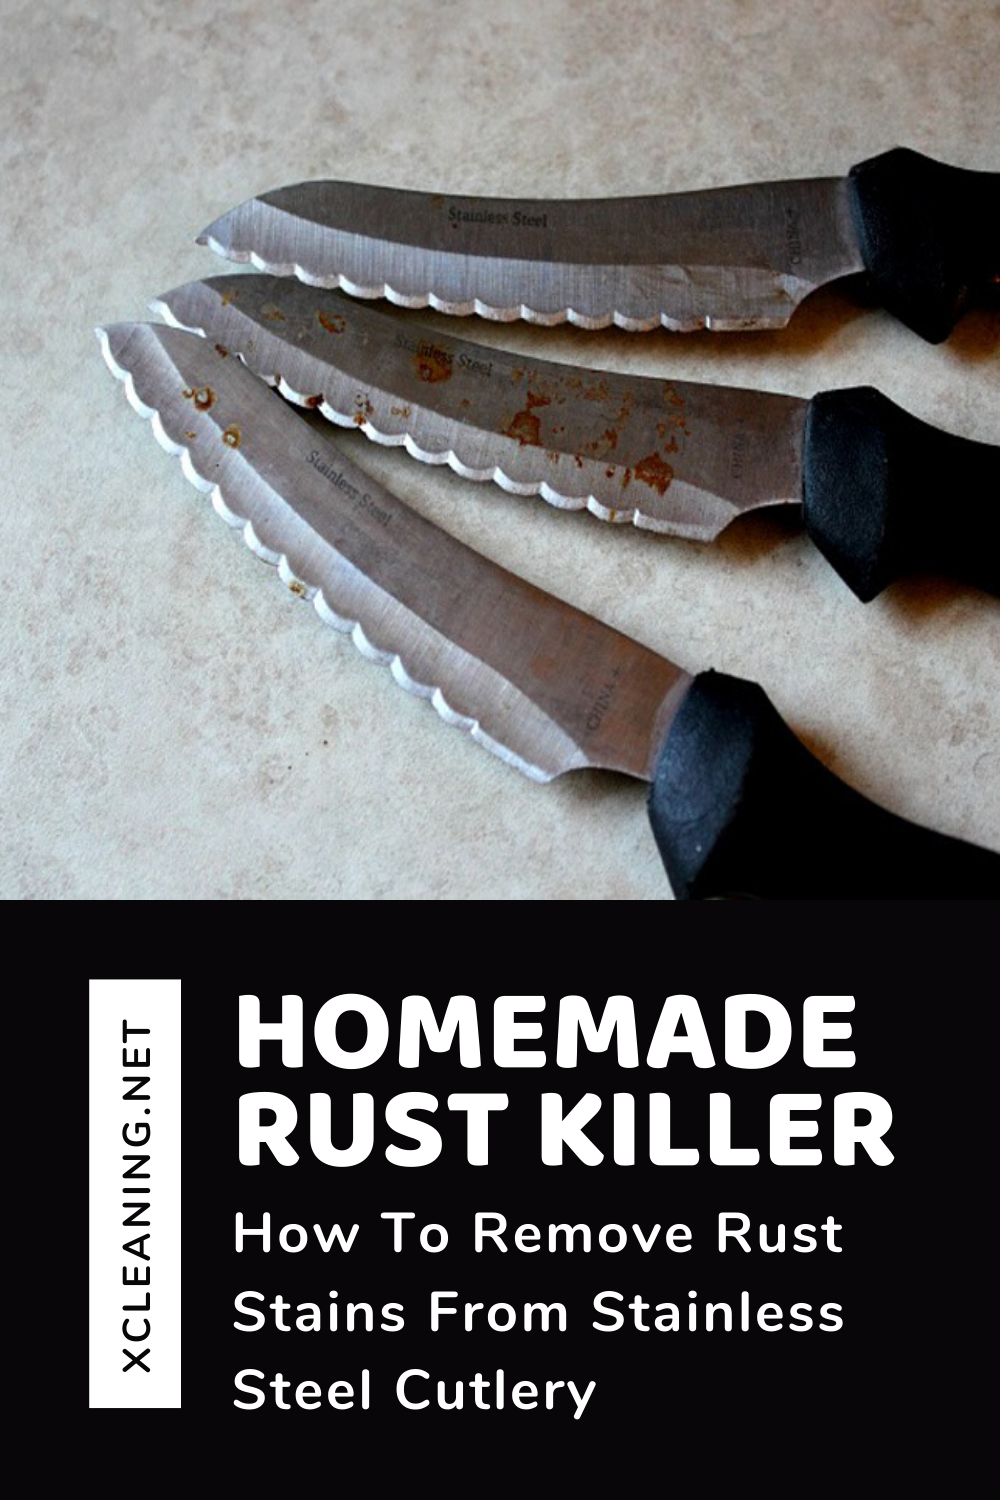 Homemade Rust Killer: How To Remove Rust Stains From ...